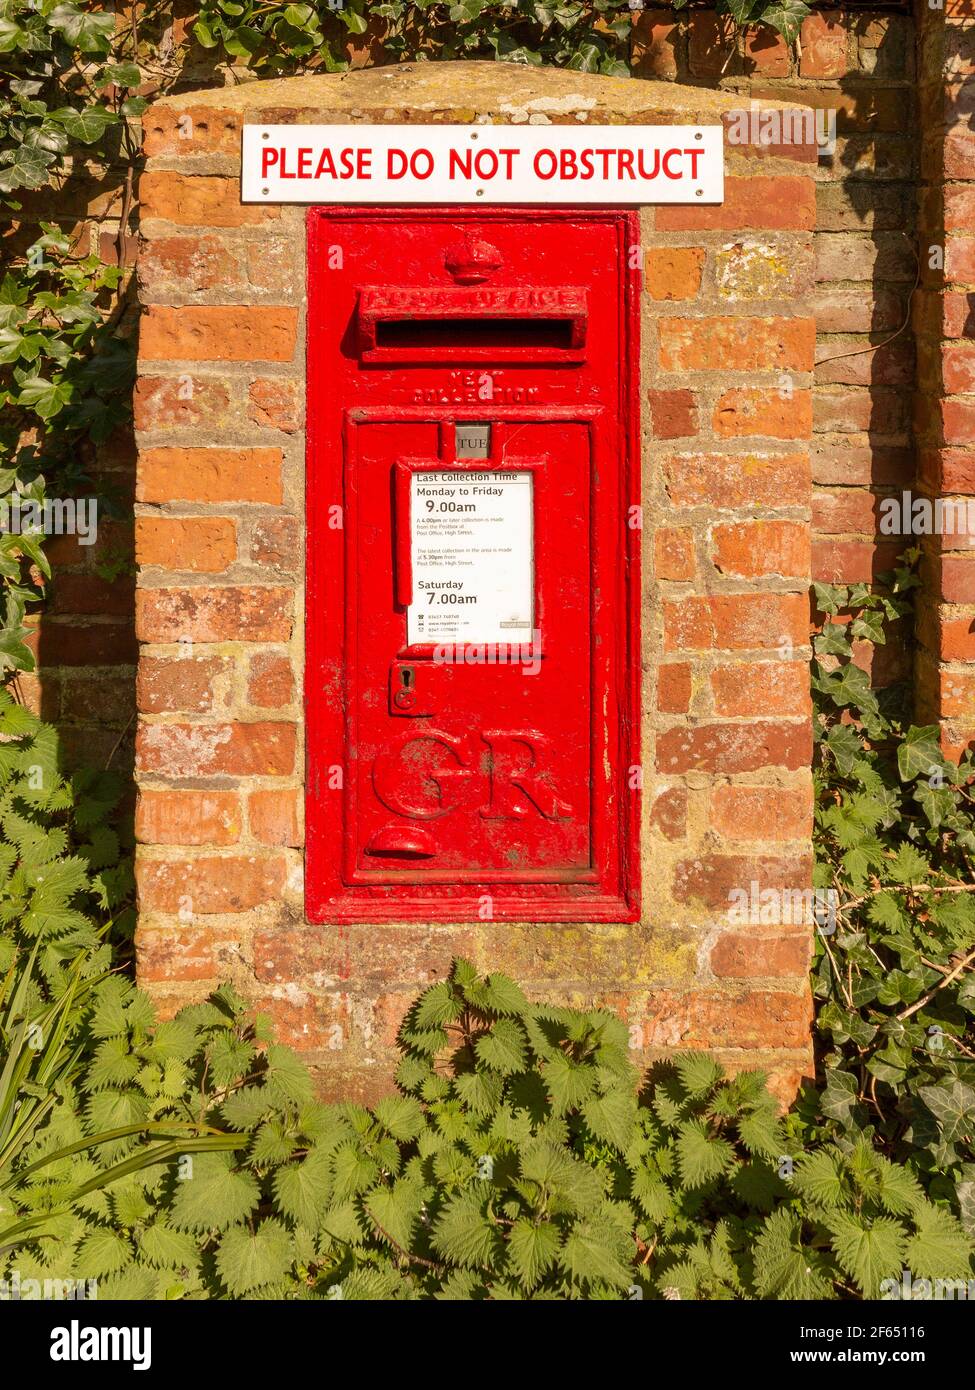 Wall mounted vintage post box from King George V era in its own brick structure surrounded by nettles and ivy with a 'Do not obstruct' sign attached. Stock Photo